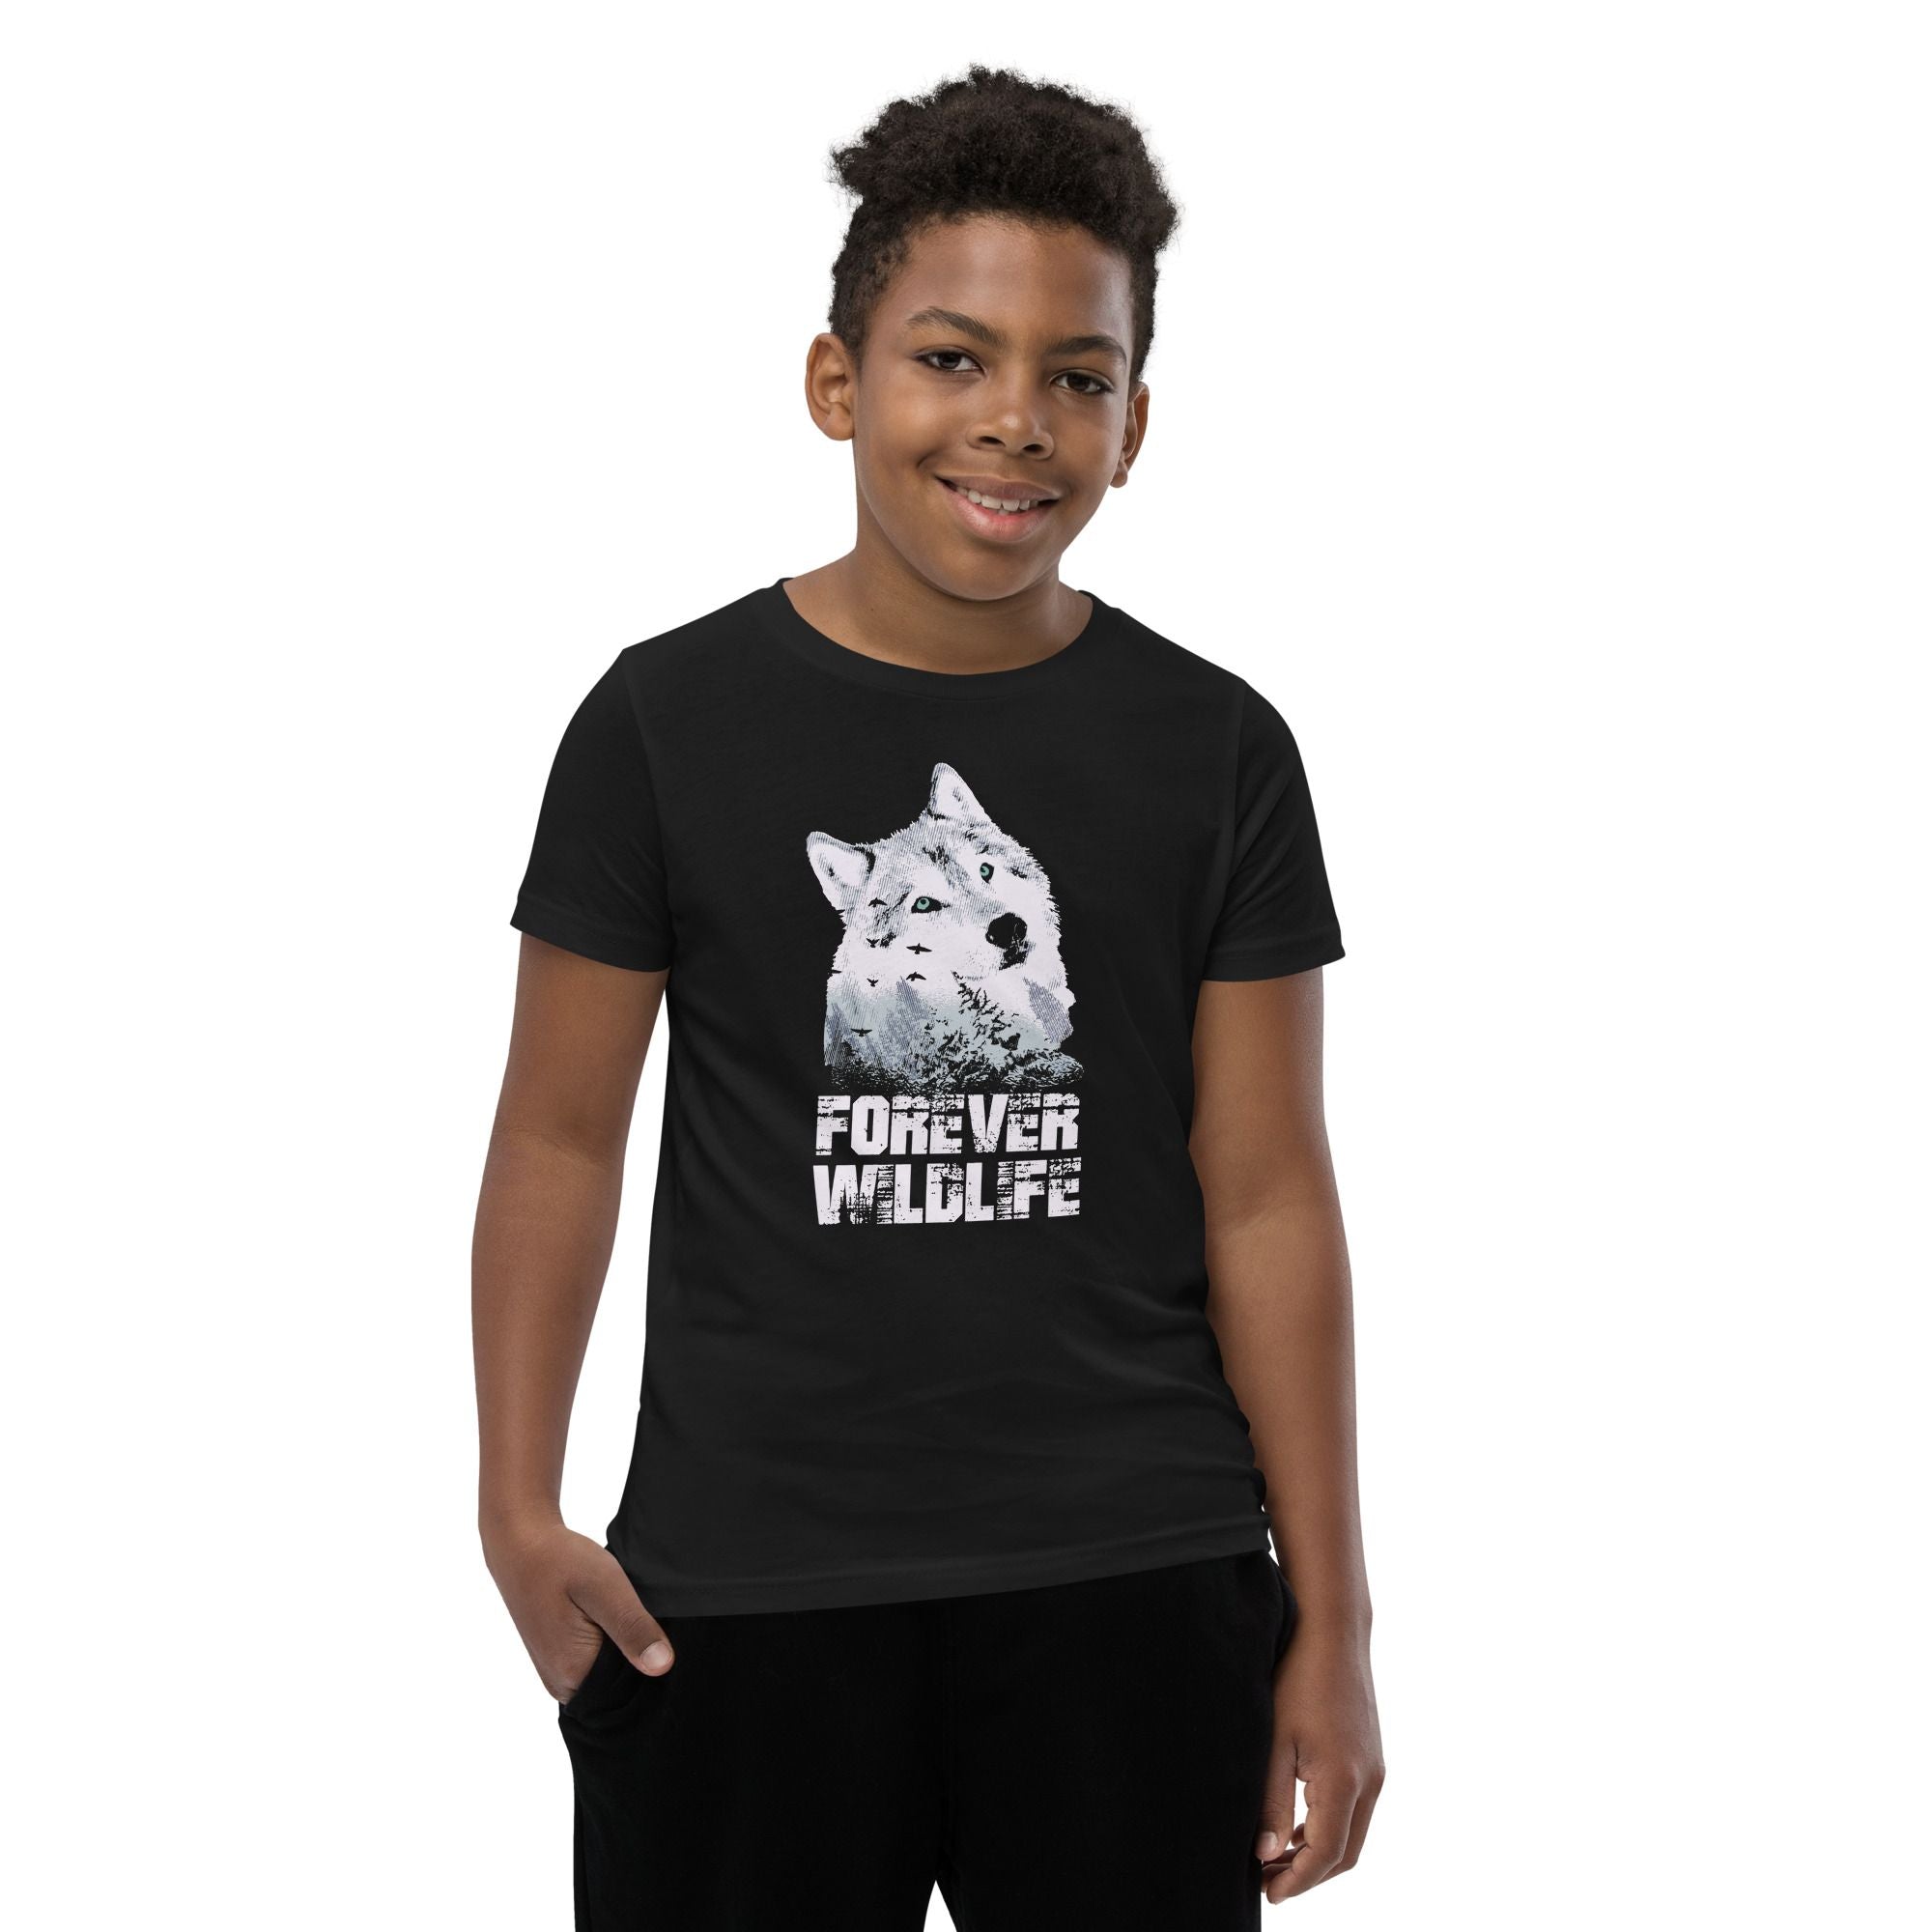 Teen wearing Black Youth T-Shirt with Wolf graphic as part of Wildlife T Shirts, Wildlife Clothing & Apparel by Forever Wildlife